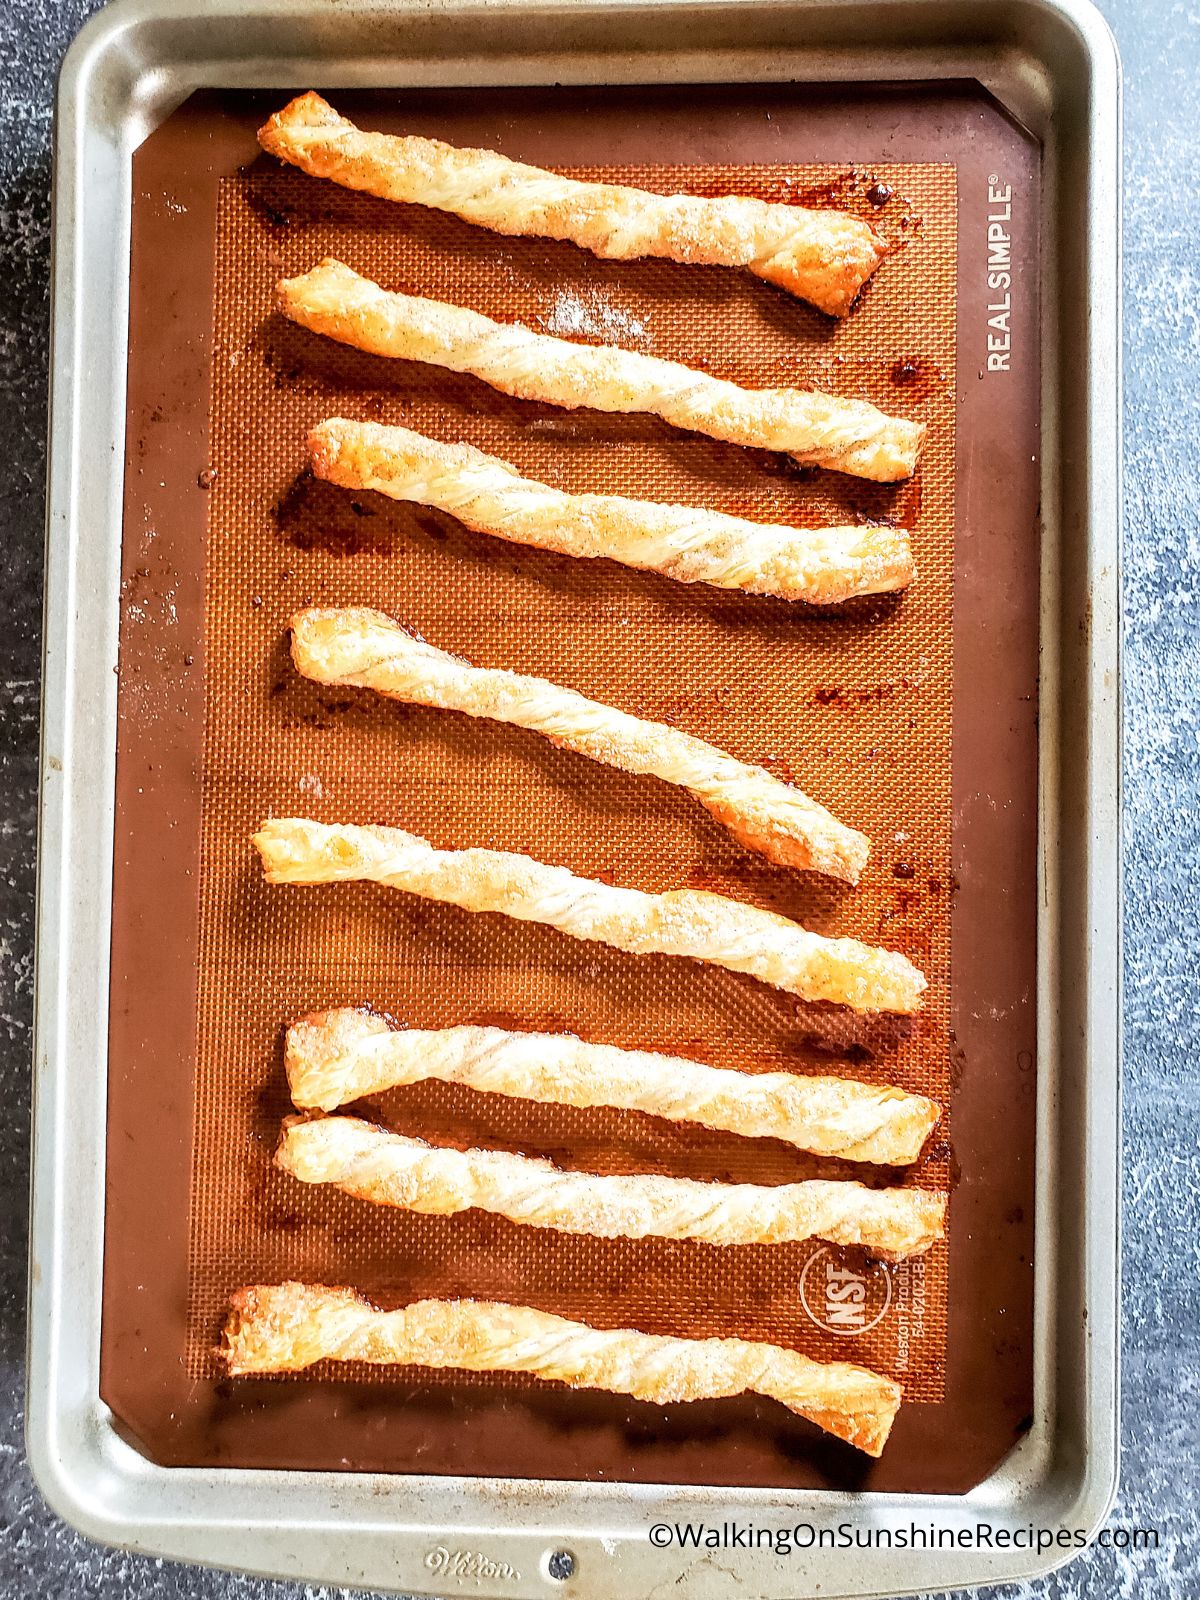 Puff Pastry Cinnamon Twists baked on baking tray.